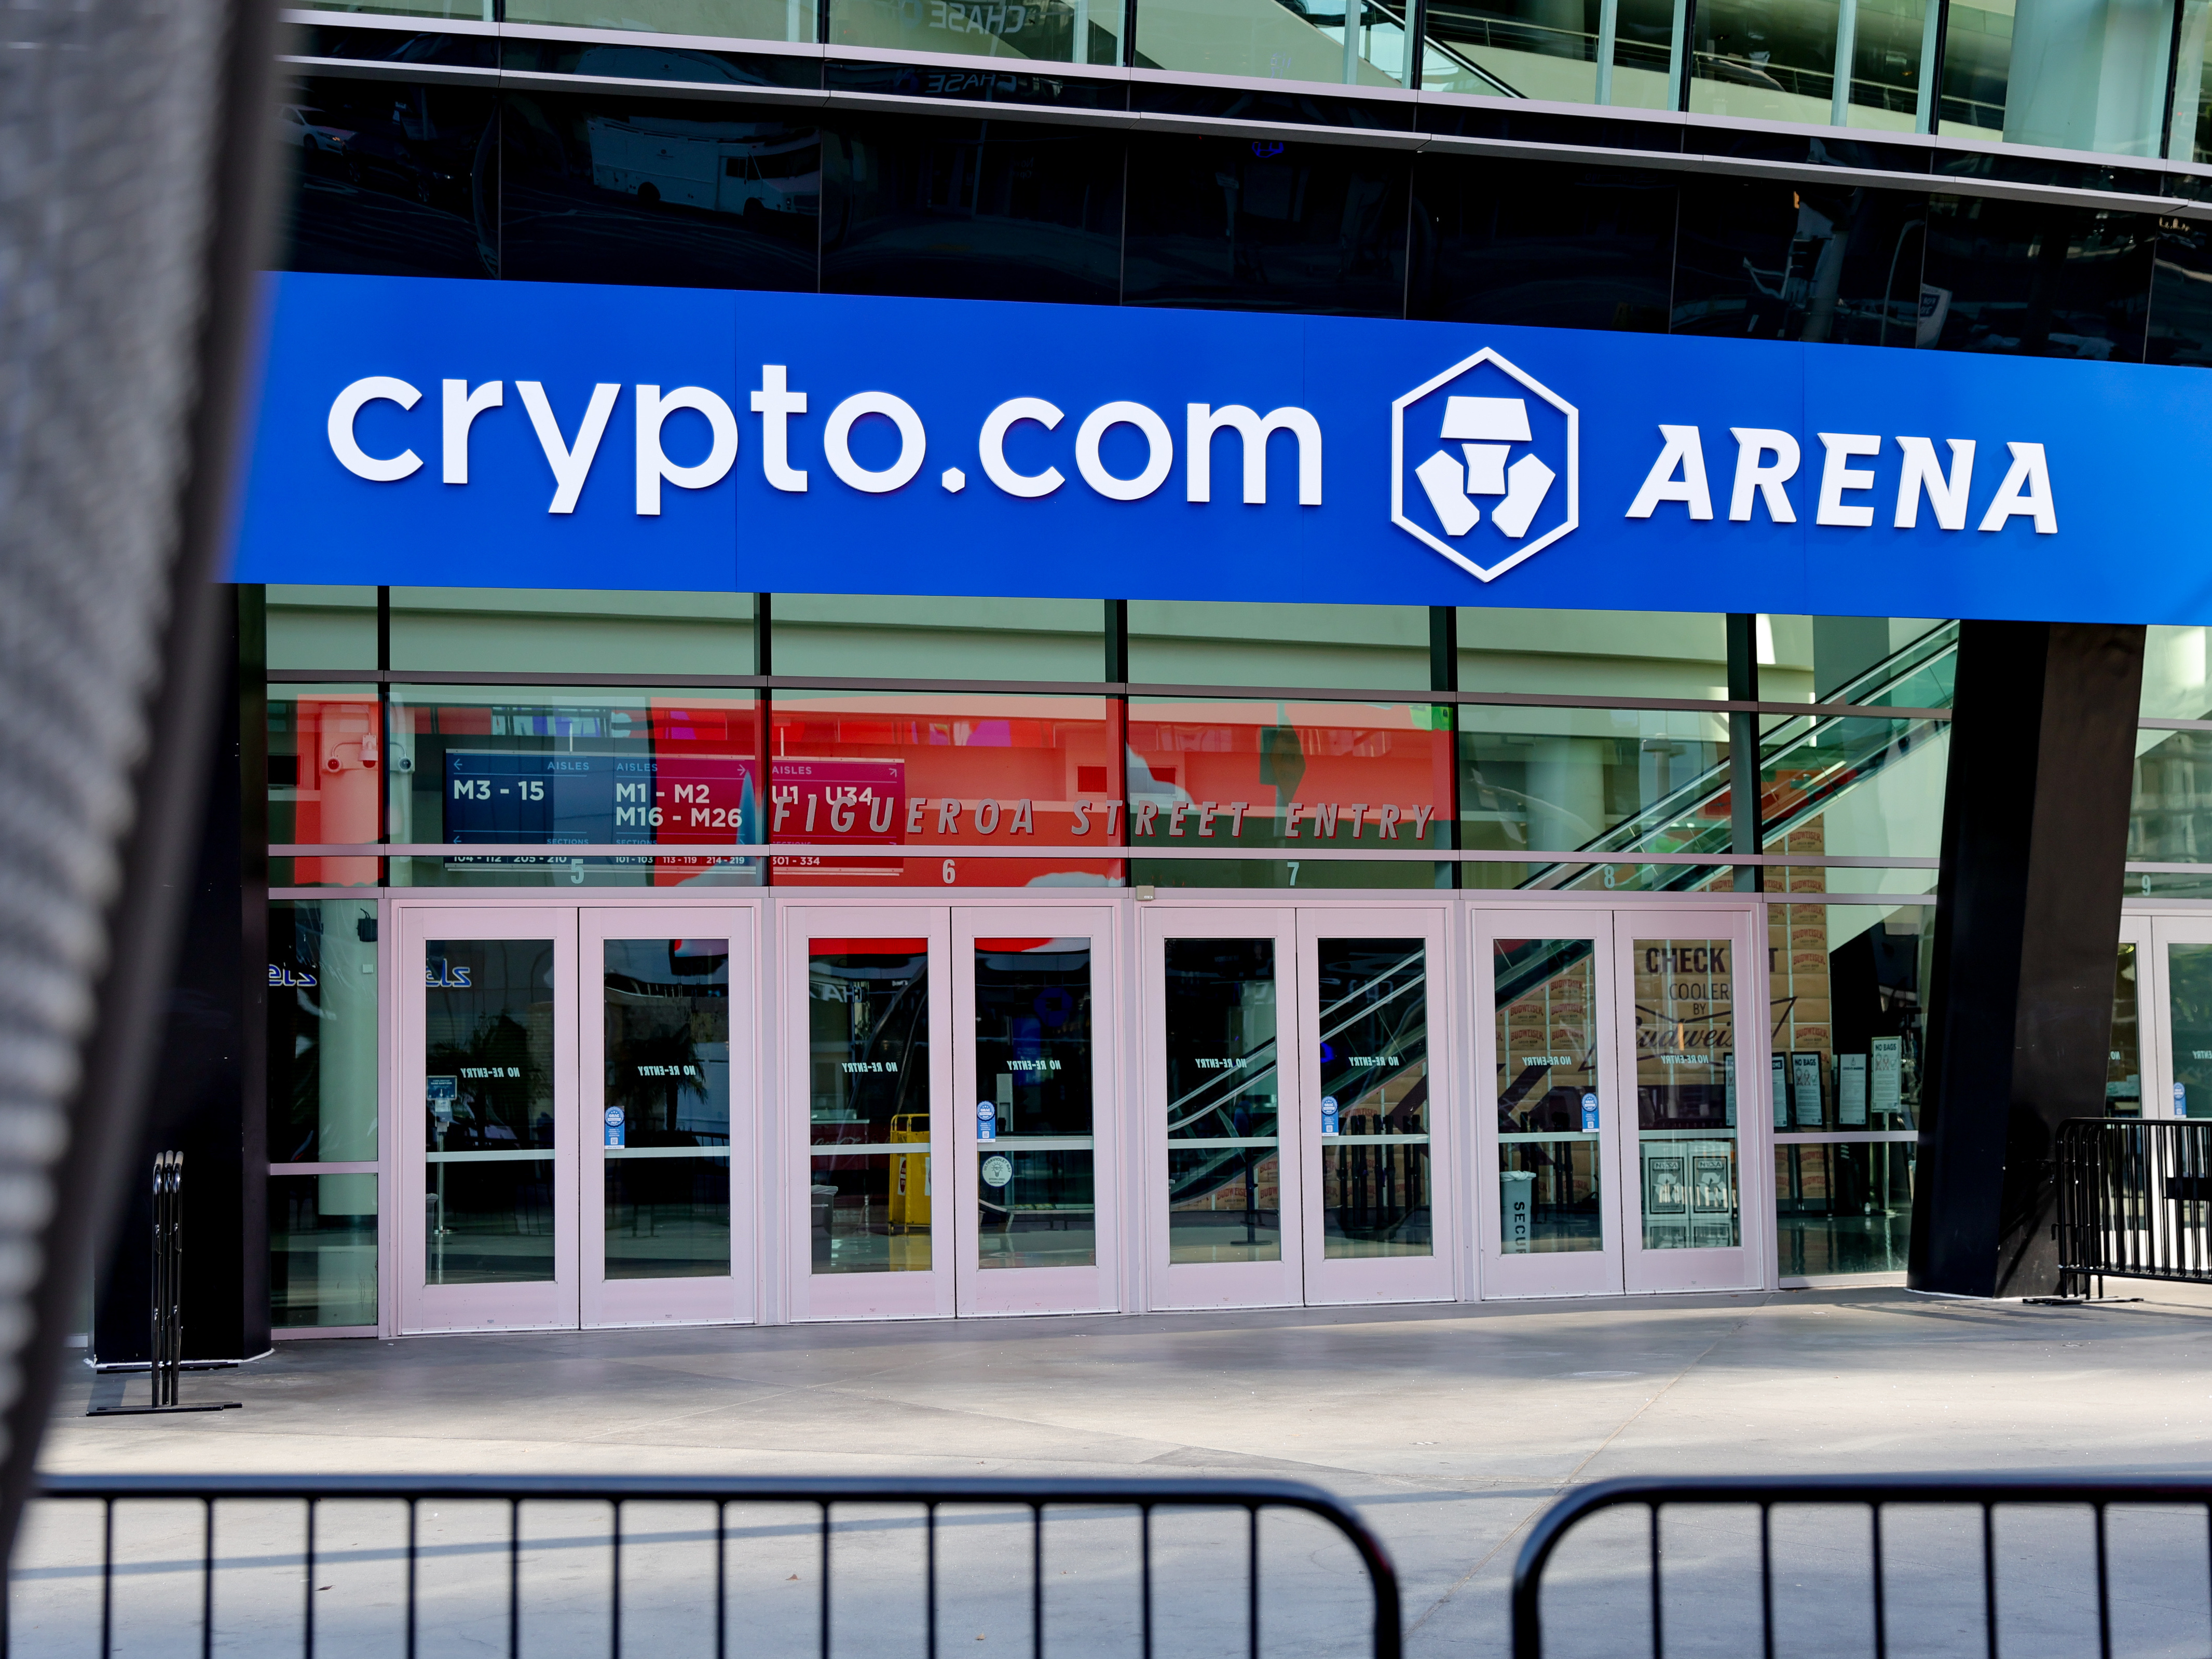 The exterior of Crypto.com Arena is seen in Los Angeles on Jan. 26. Many cryptocurrency companies hired celebrities to pitch their products and signed sponsorship deals.